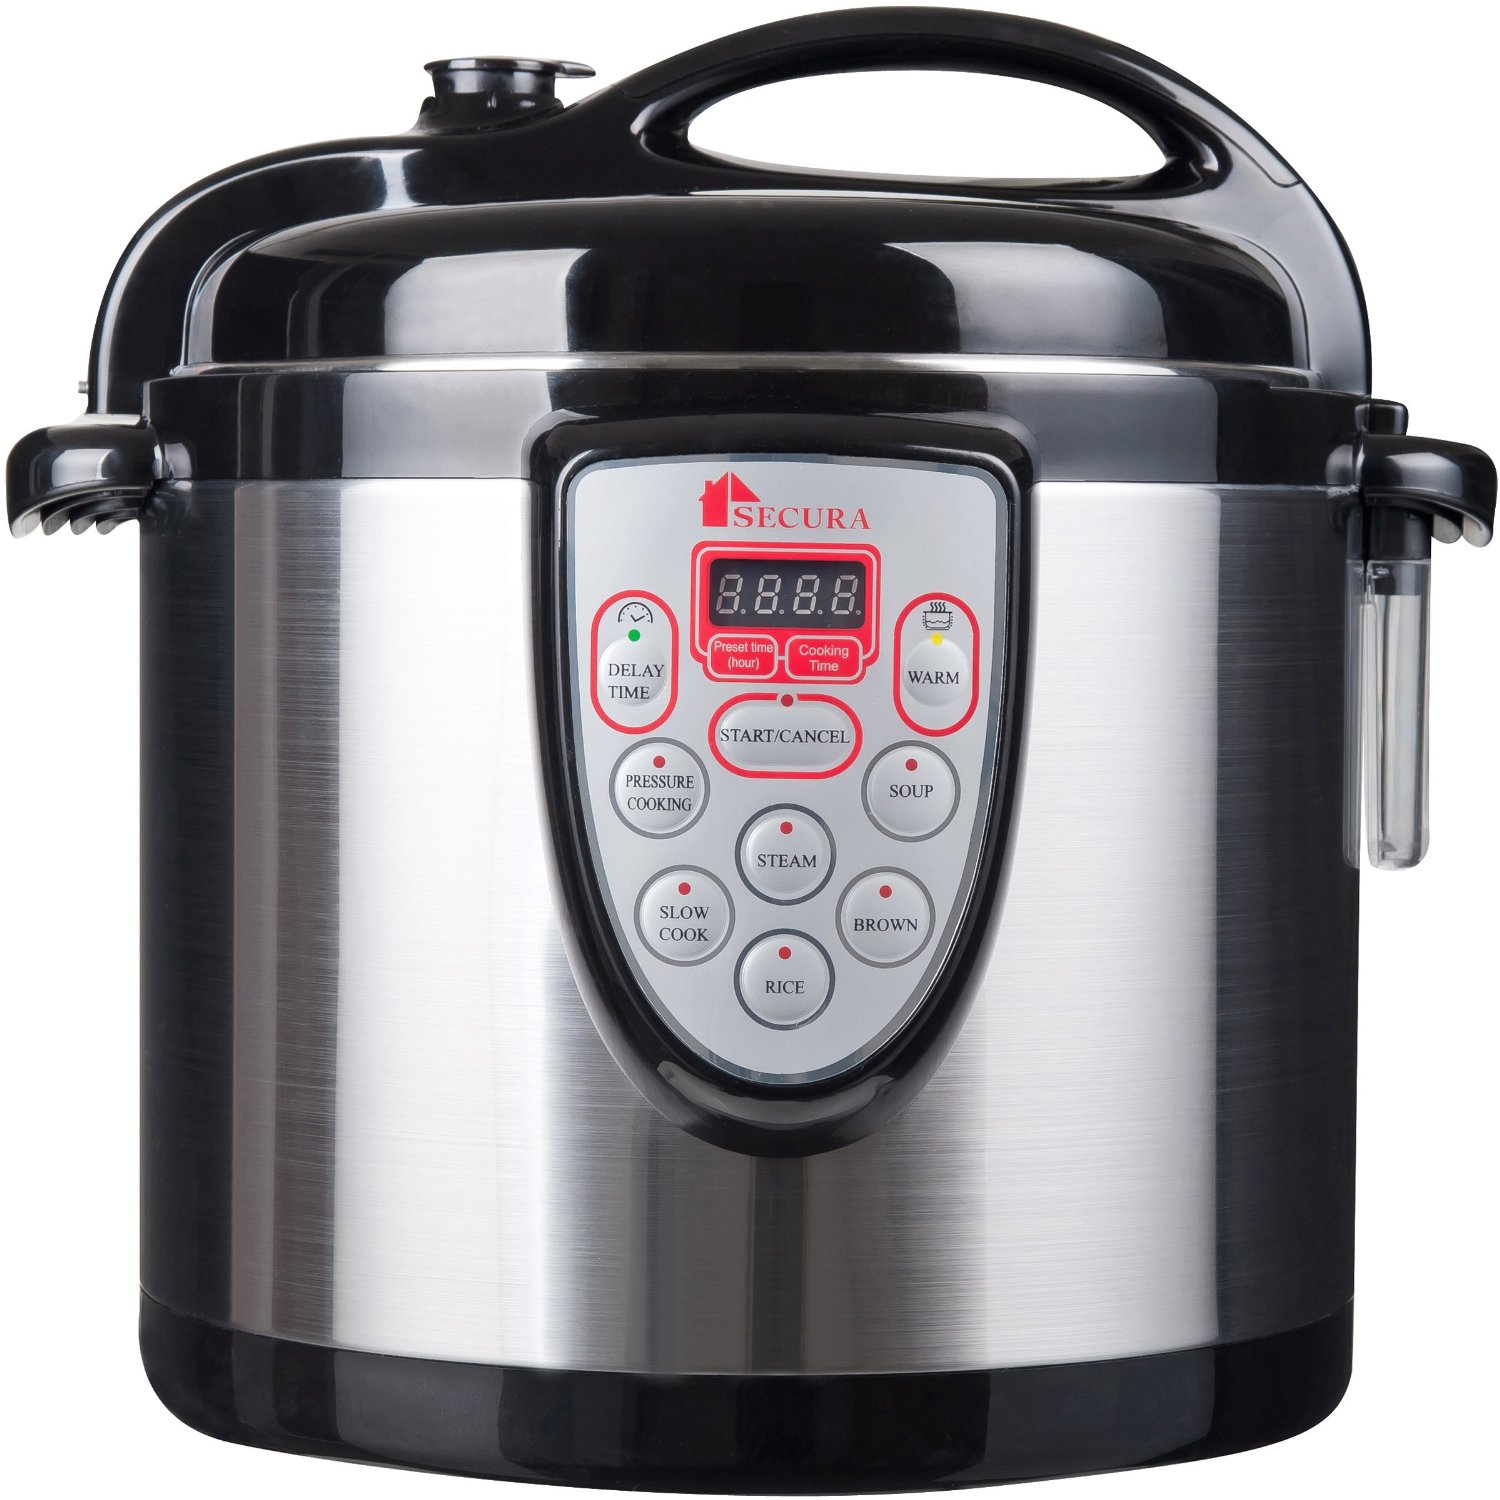 Kitchen & Dining: Reviews of Secura 6-in-1 Electric Pressure Cooker 6qt ...